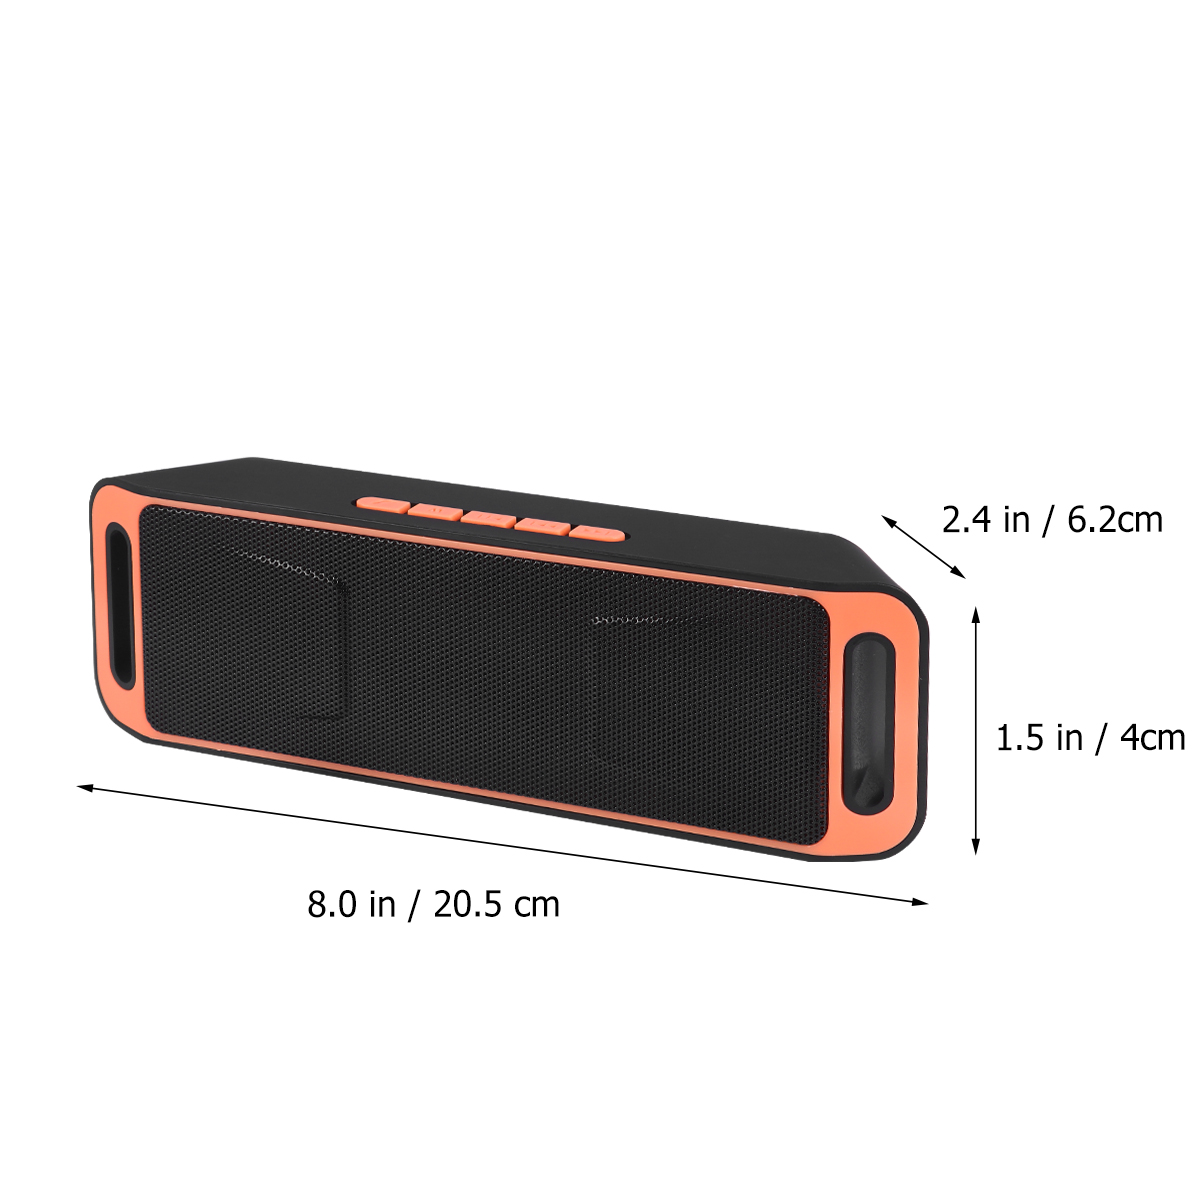 OUNONA Wireless Speaker Mini Portable Computer Speaker Multi-purpose Speaker Outdoor Wireless Speaker Dual Horn Subwoofer Stereo for Outdoor Office Store - image 4 of 5